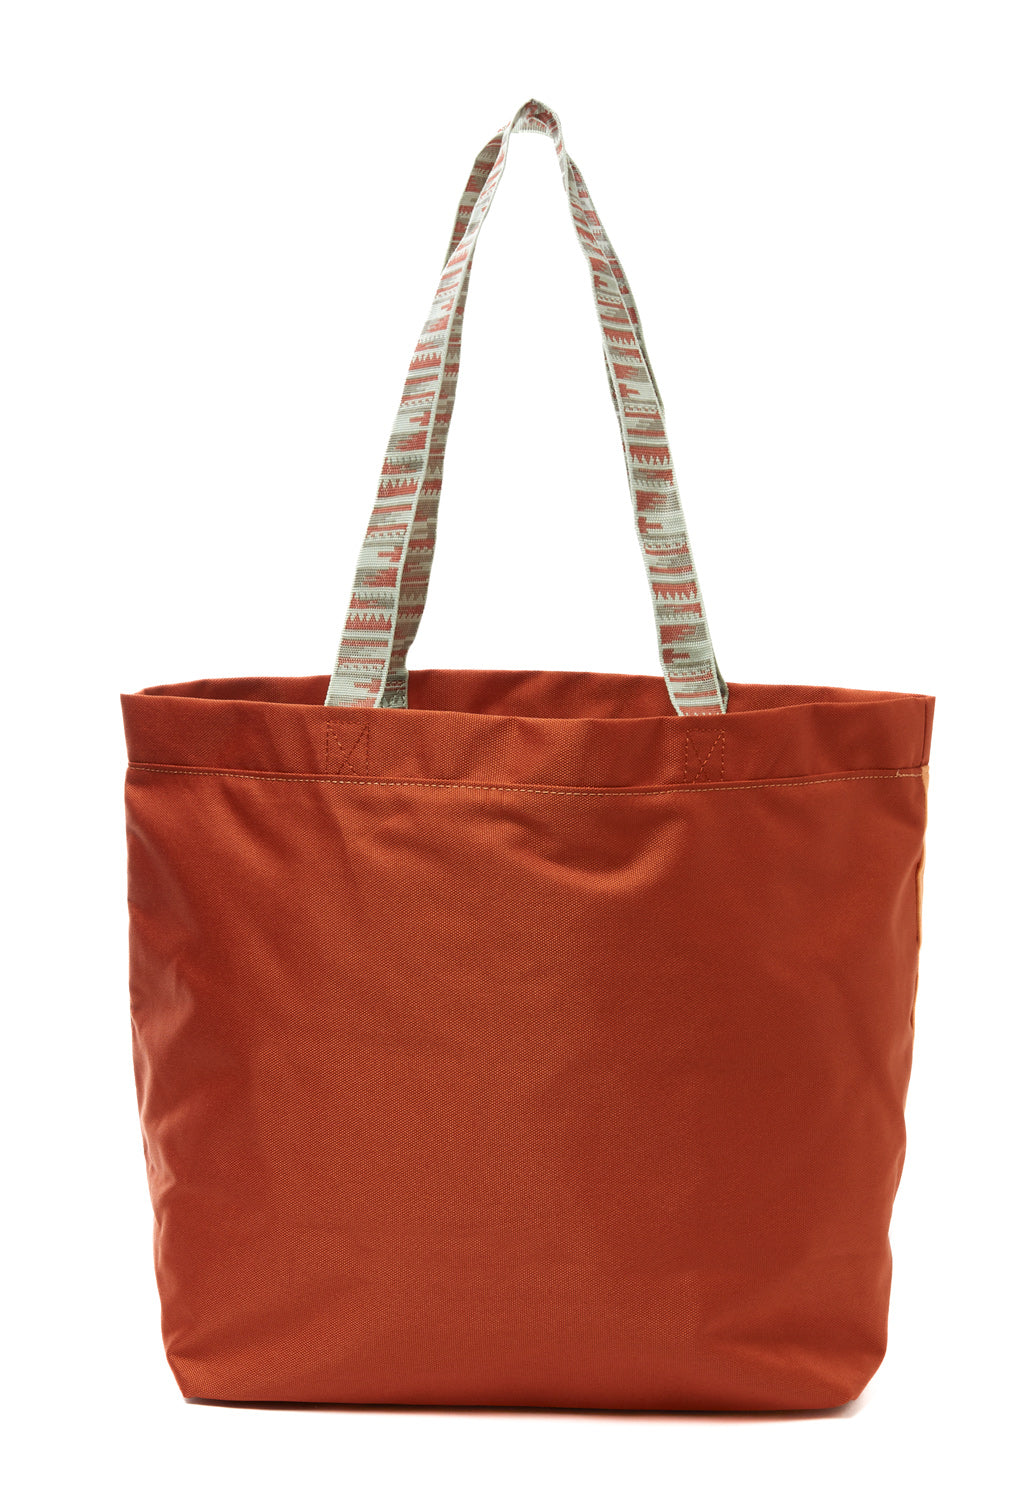 KAVU Twin Falls Tote - Russet Valley